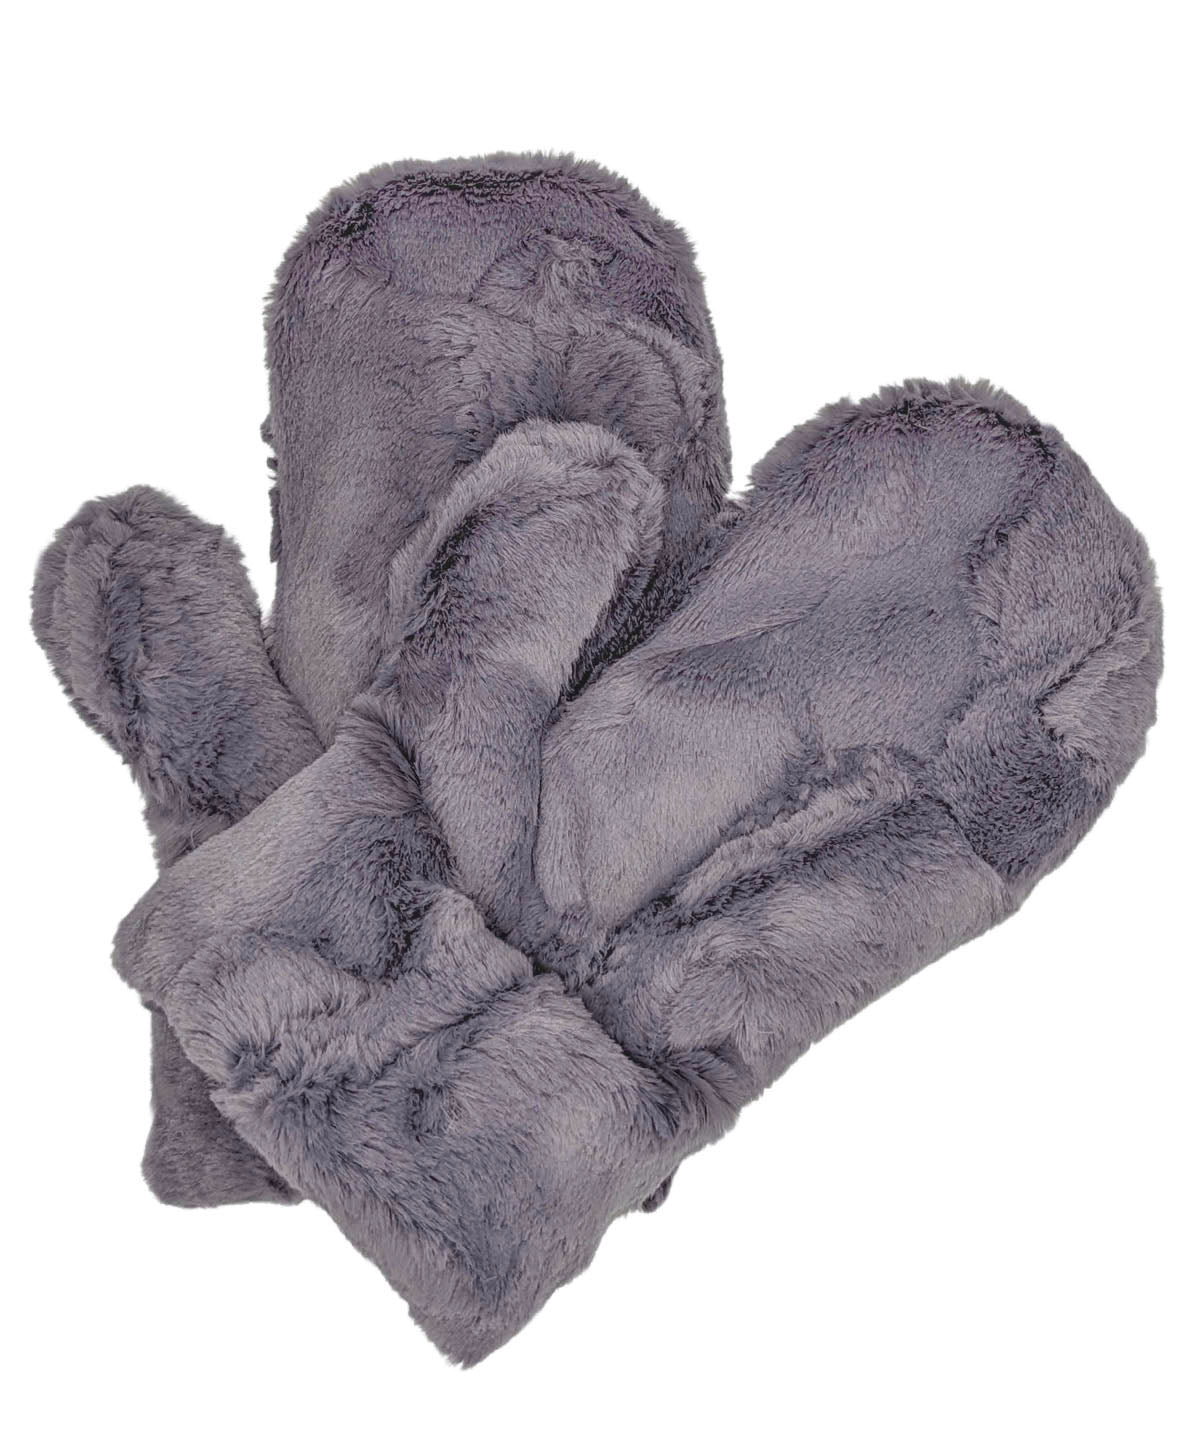 Men's Mittens | Cuddly Faux Fur in Cool Gray | Handmade in the USA bye Pandemonium Seattle